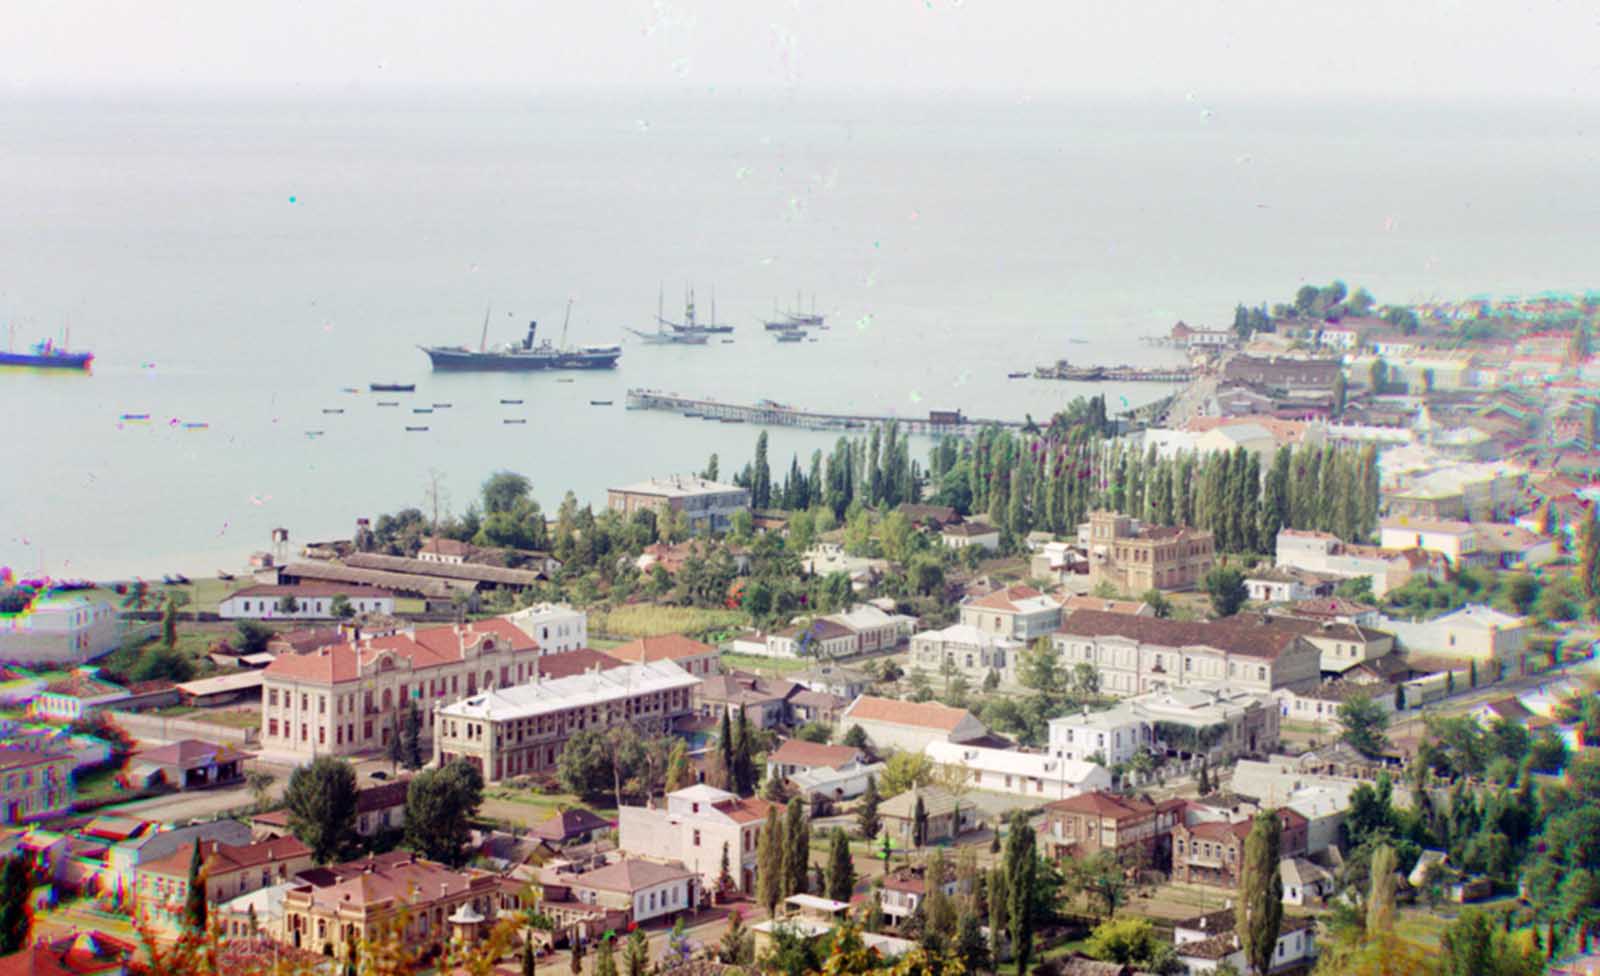 A general view of Sukhumi, Abkhazia and its bay, seen sometime around 1910 from Cherniavskii Mountain.